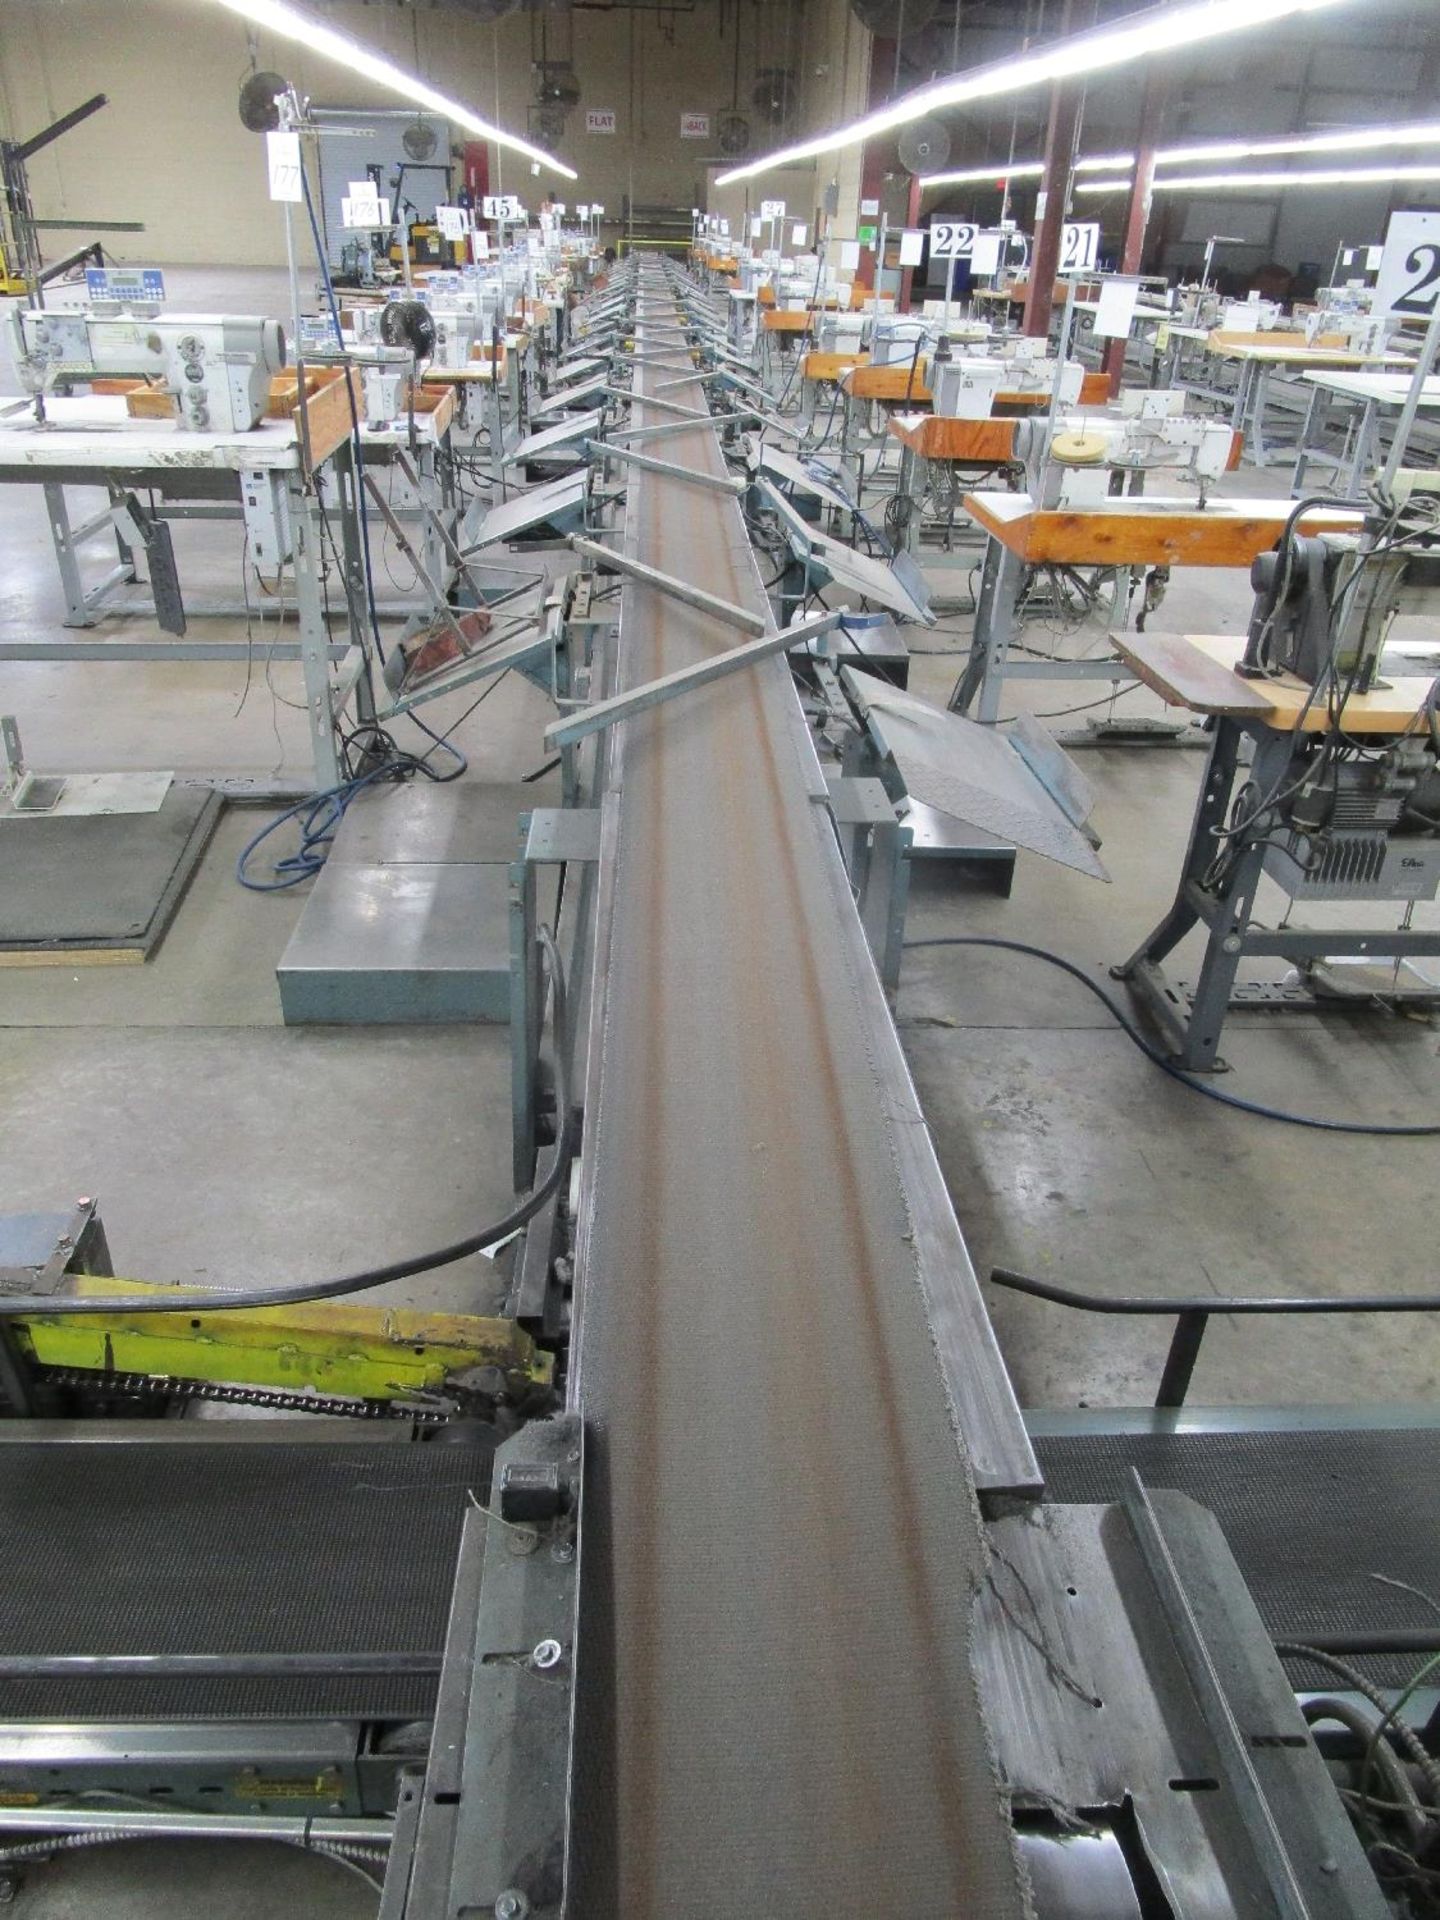 Hytrol Powered Conveyor System Throughout Sewing Department - Image 3 of 7